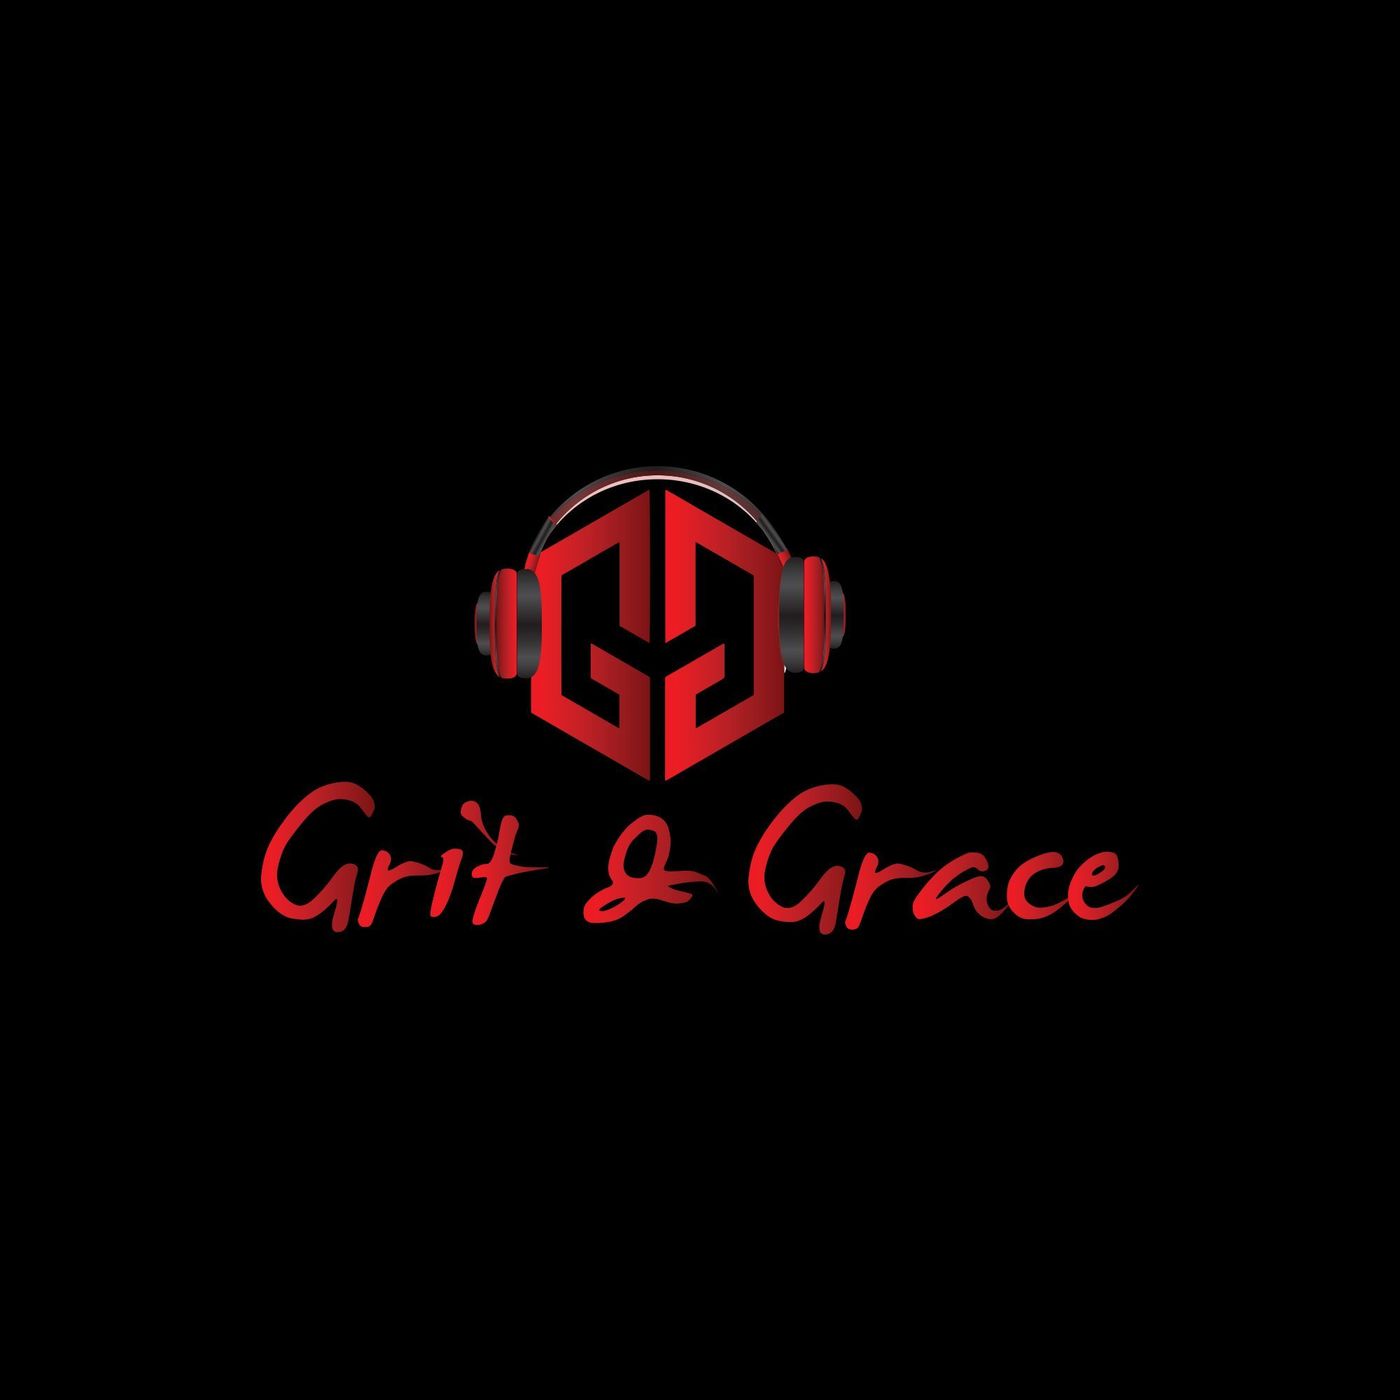 Grit and Grace: Crushing Cancer